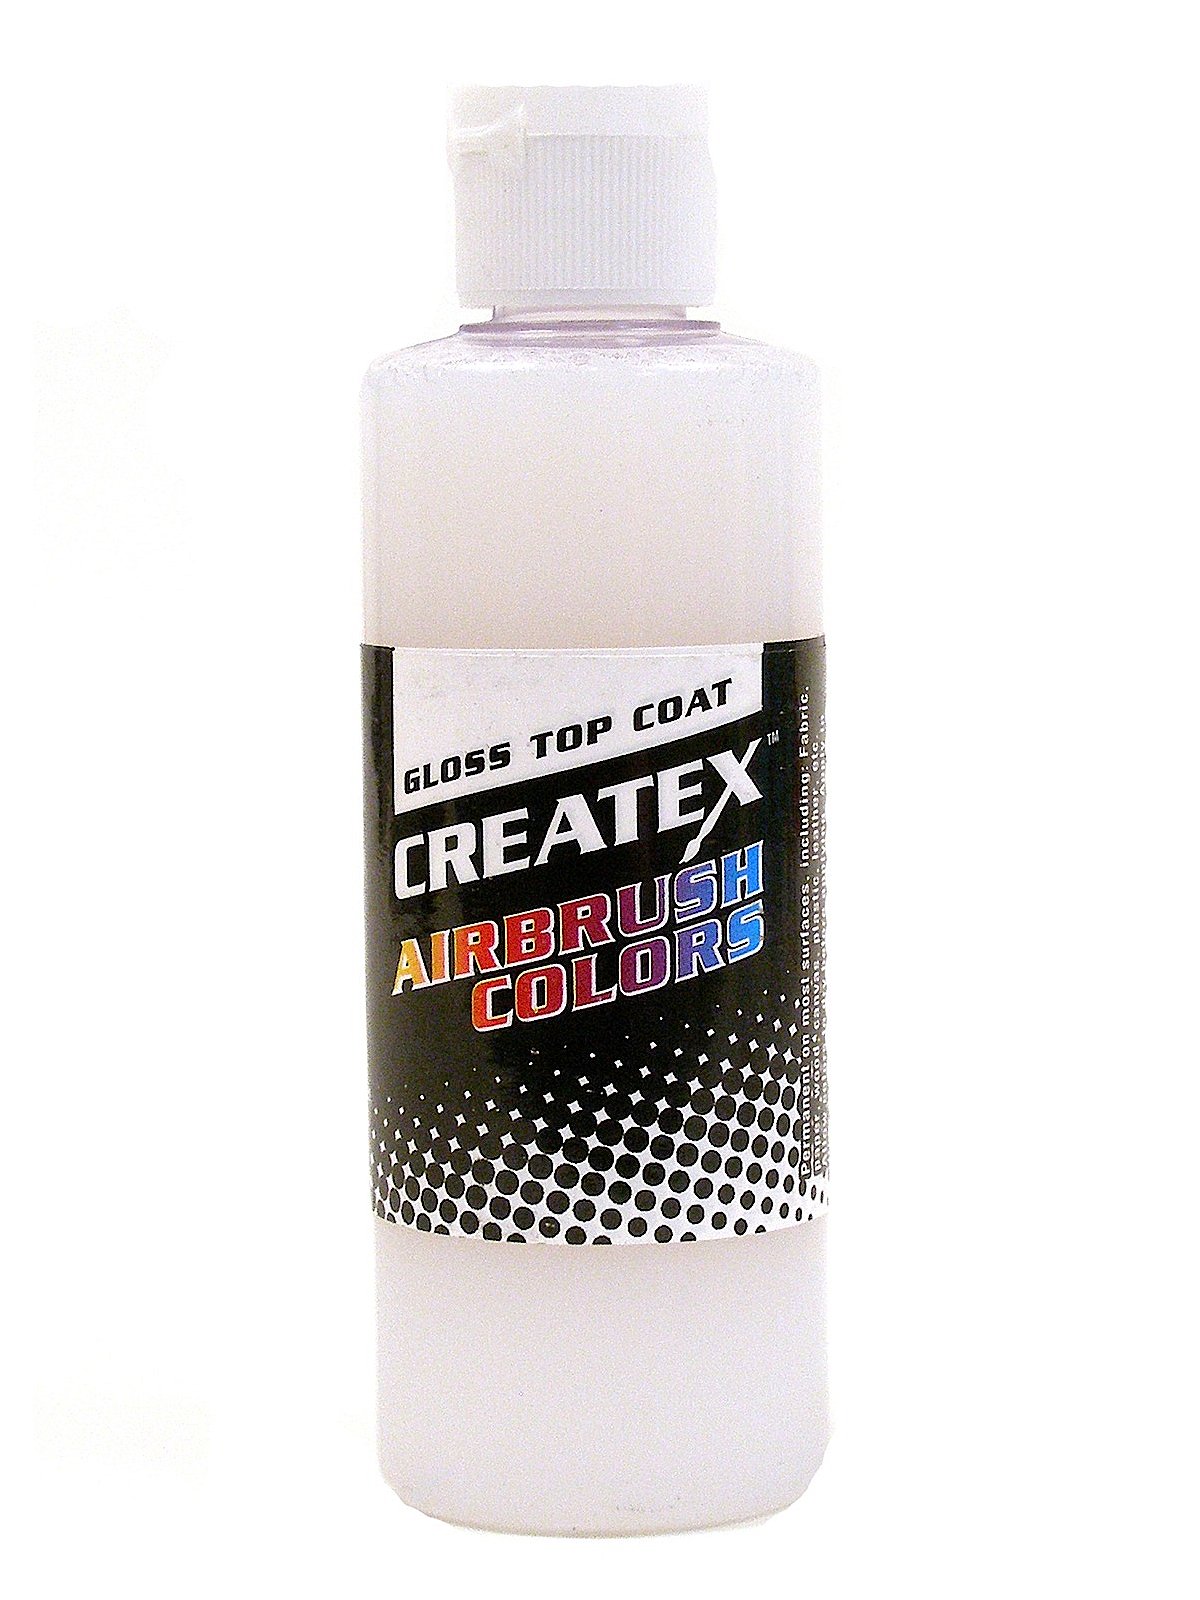 AIRBRUSH PAINT ACRYLIC LACQUER CLEAR COAT, Airbrush Store